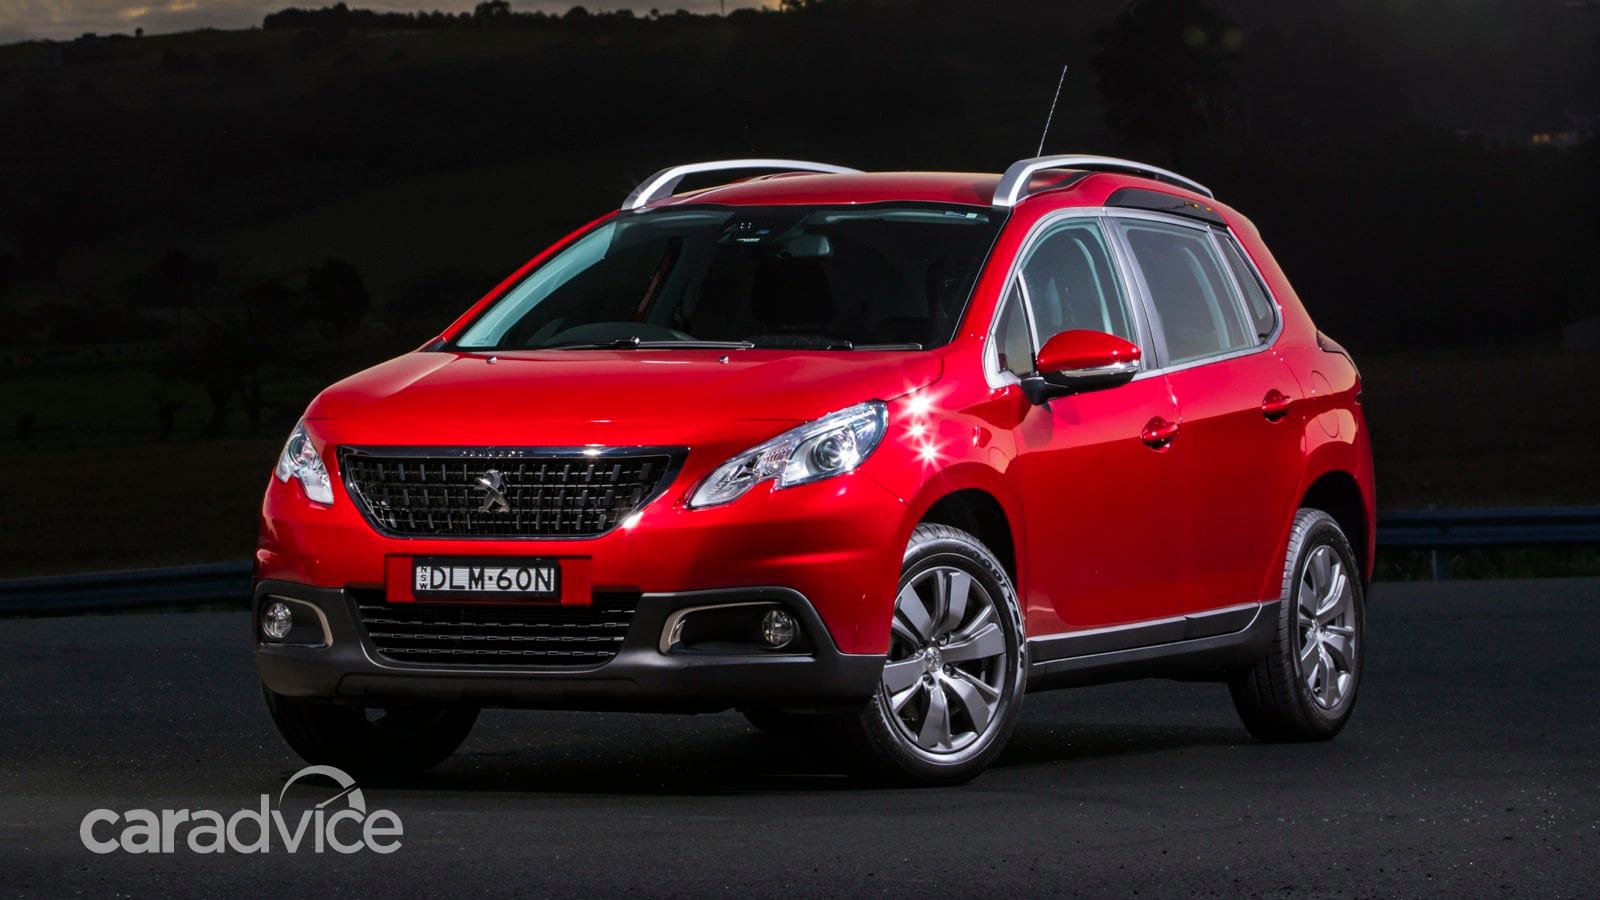 2017 Peugeot 2008 review  CarAdvice